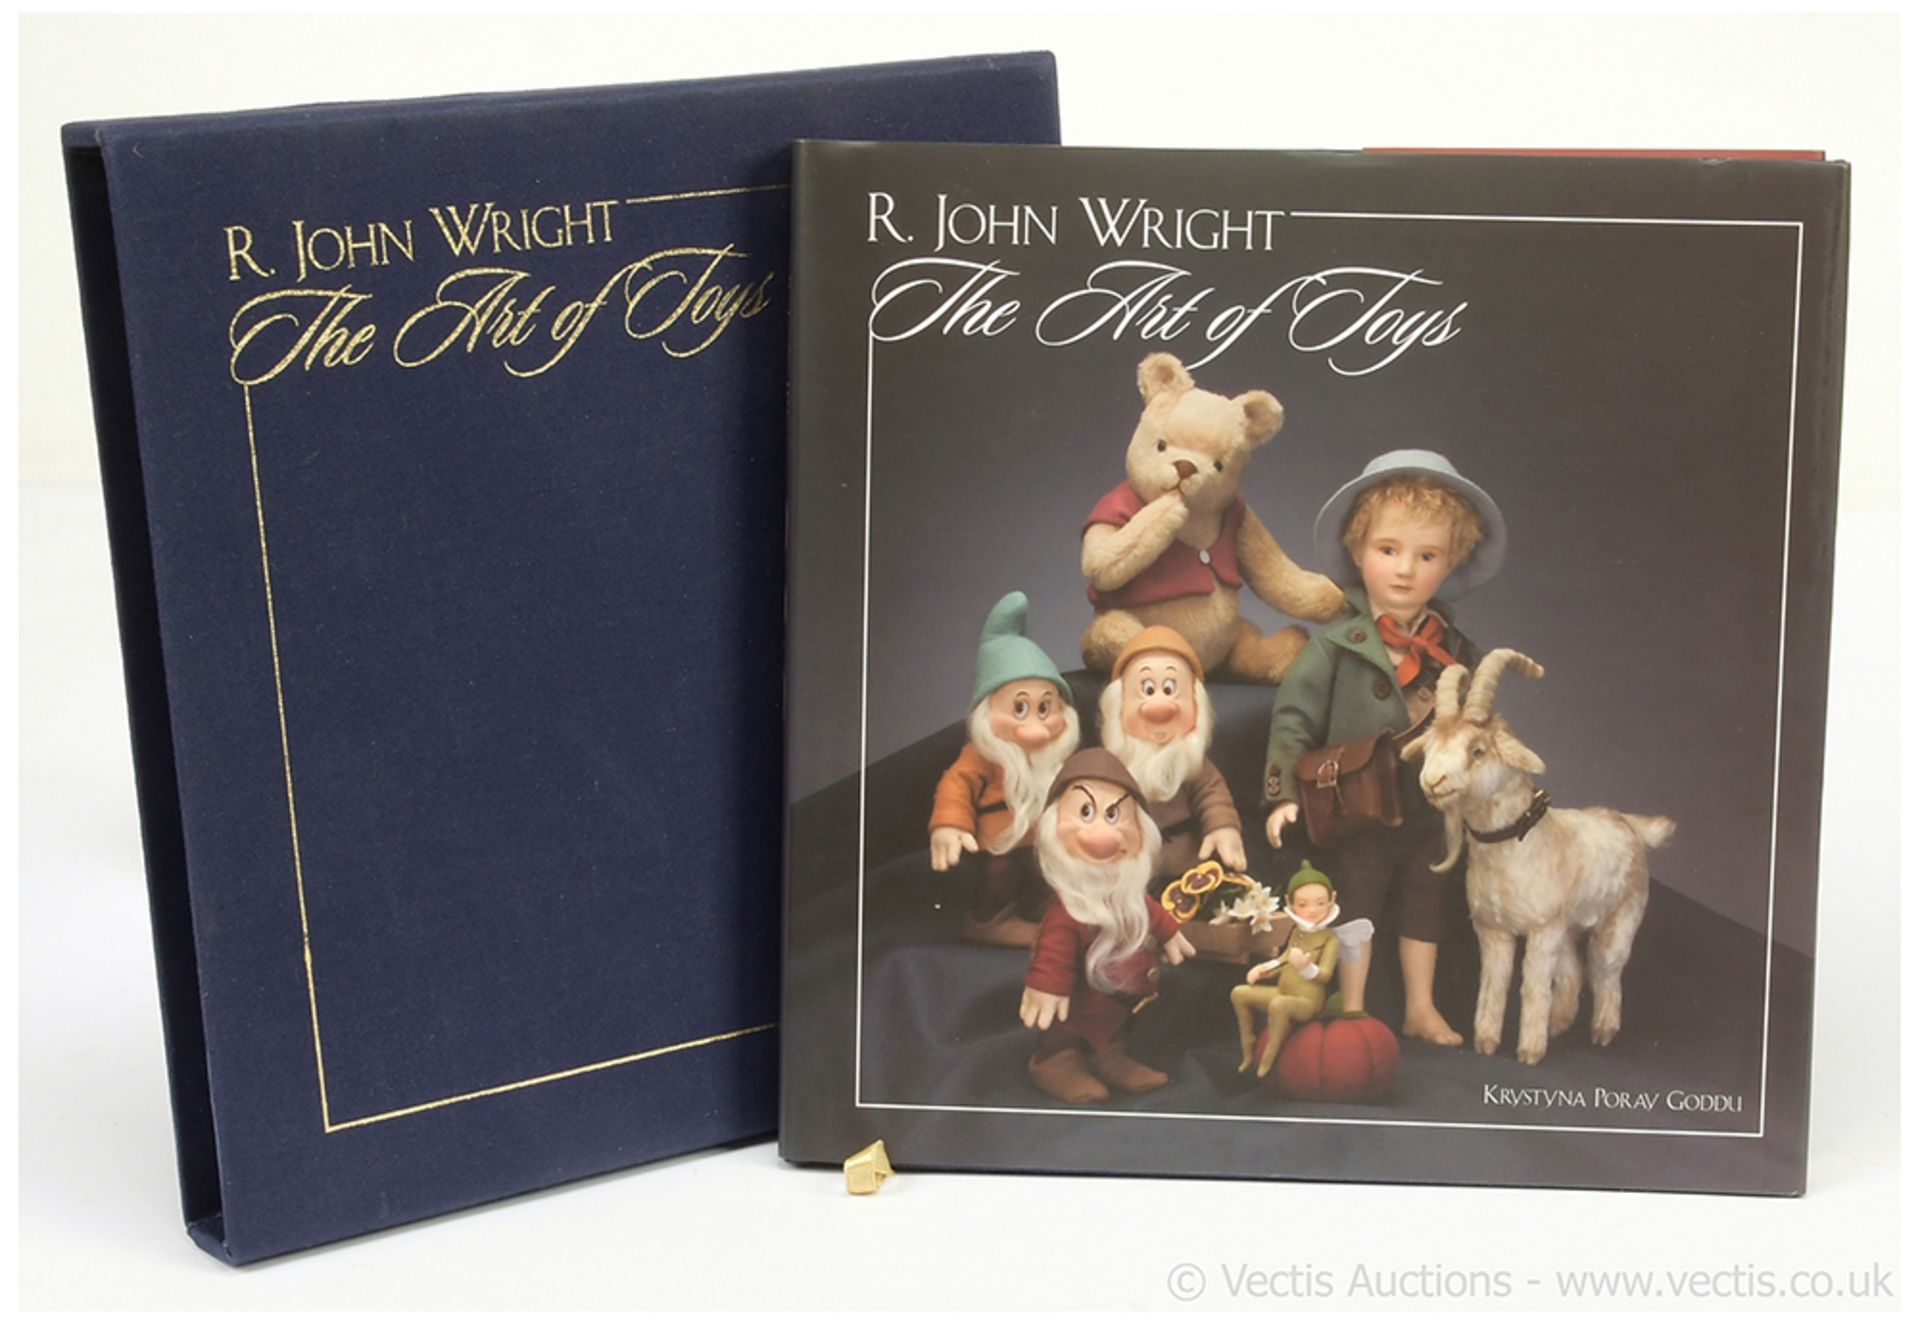 R John Wright: The Art of Toys by Krystyna